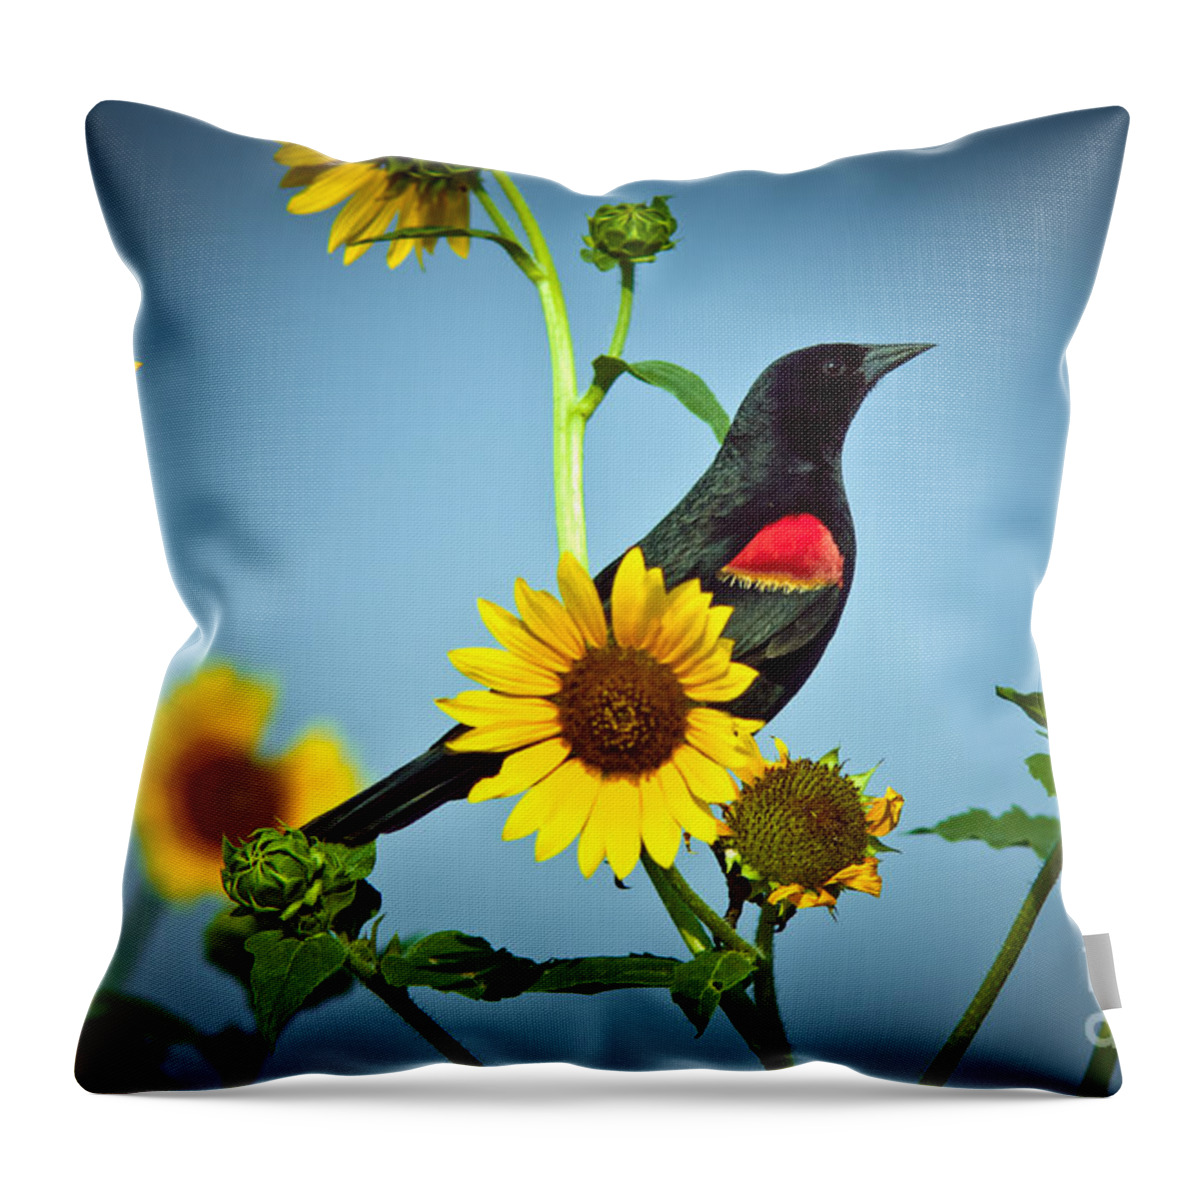 Animal Throw Pillow featuring the photograph Redwing In Sunflowers by Robert Frederick